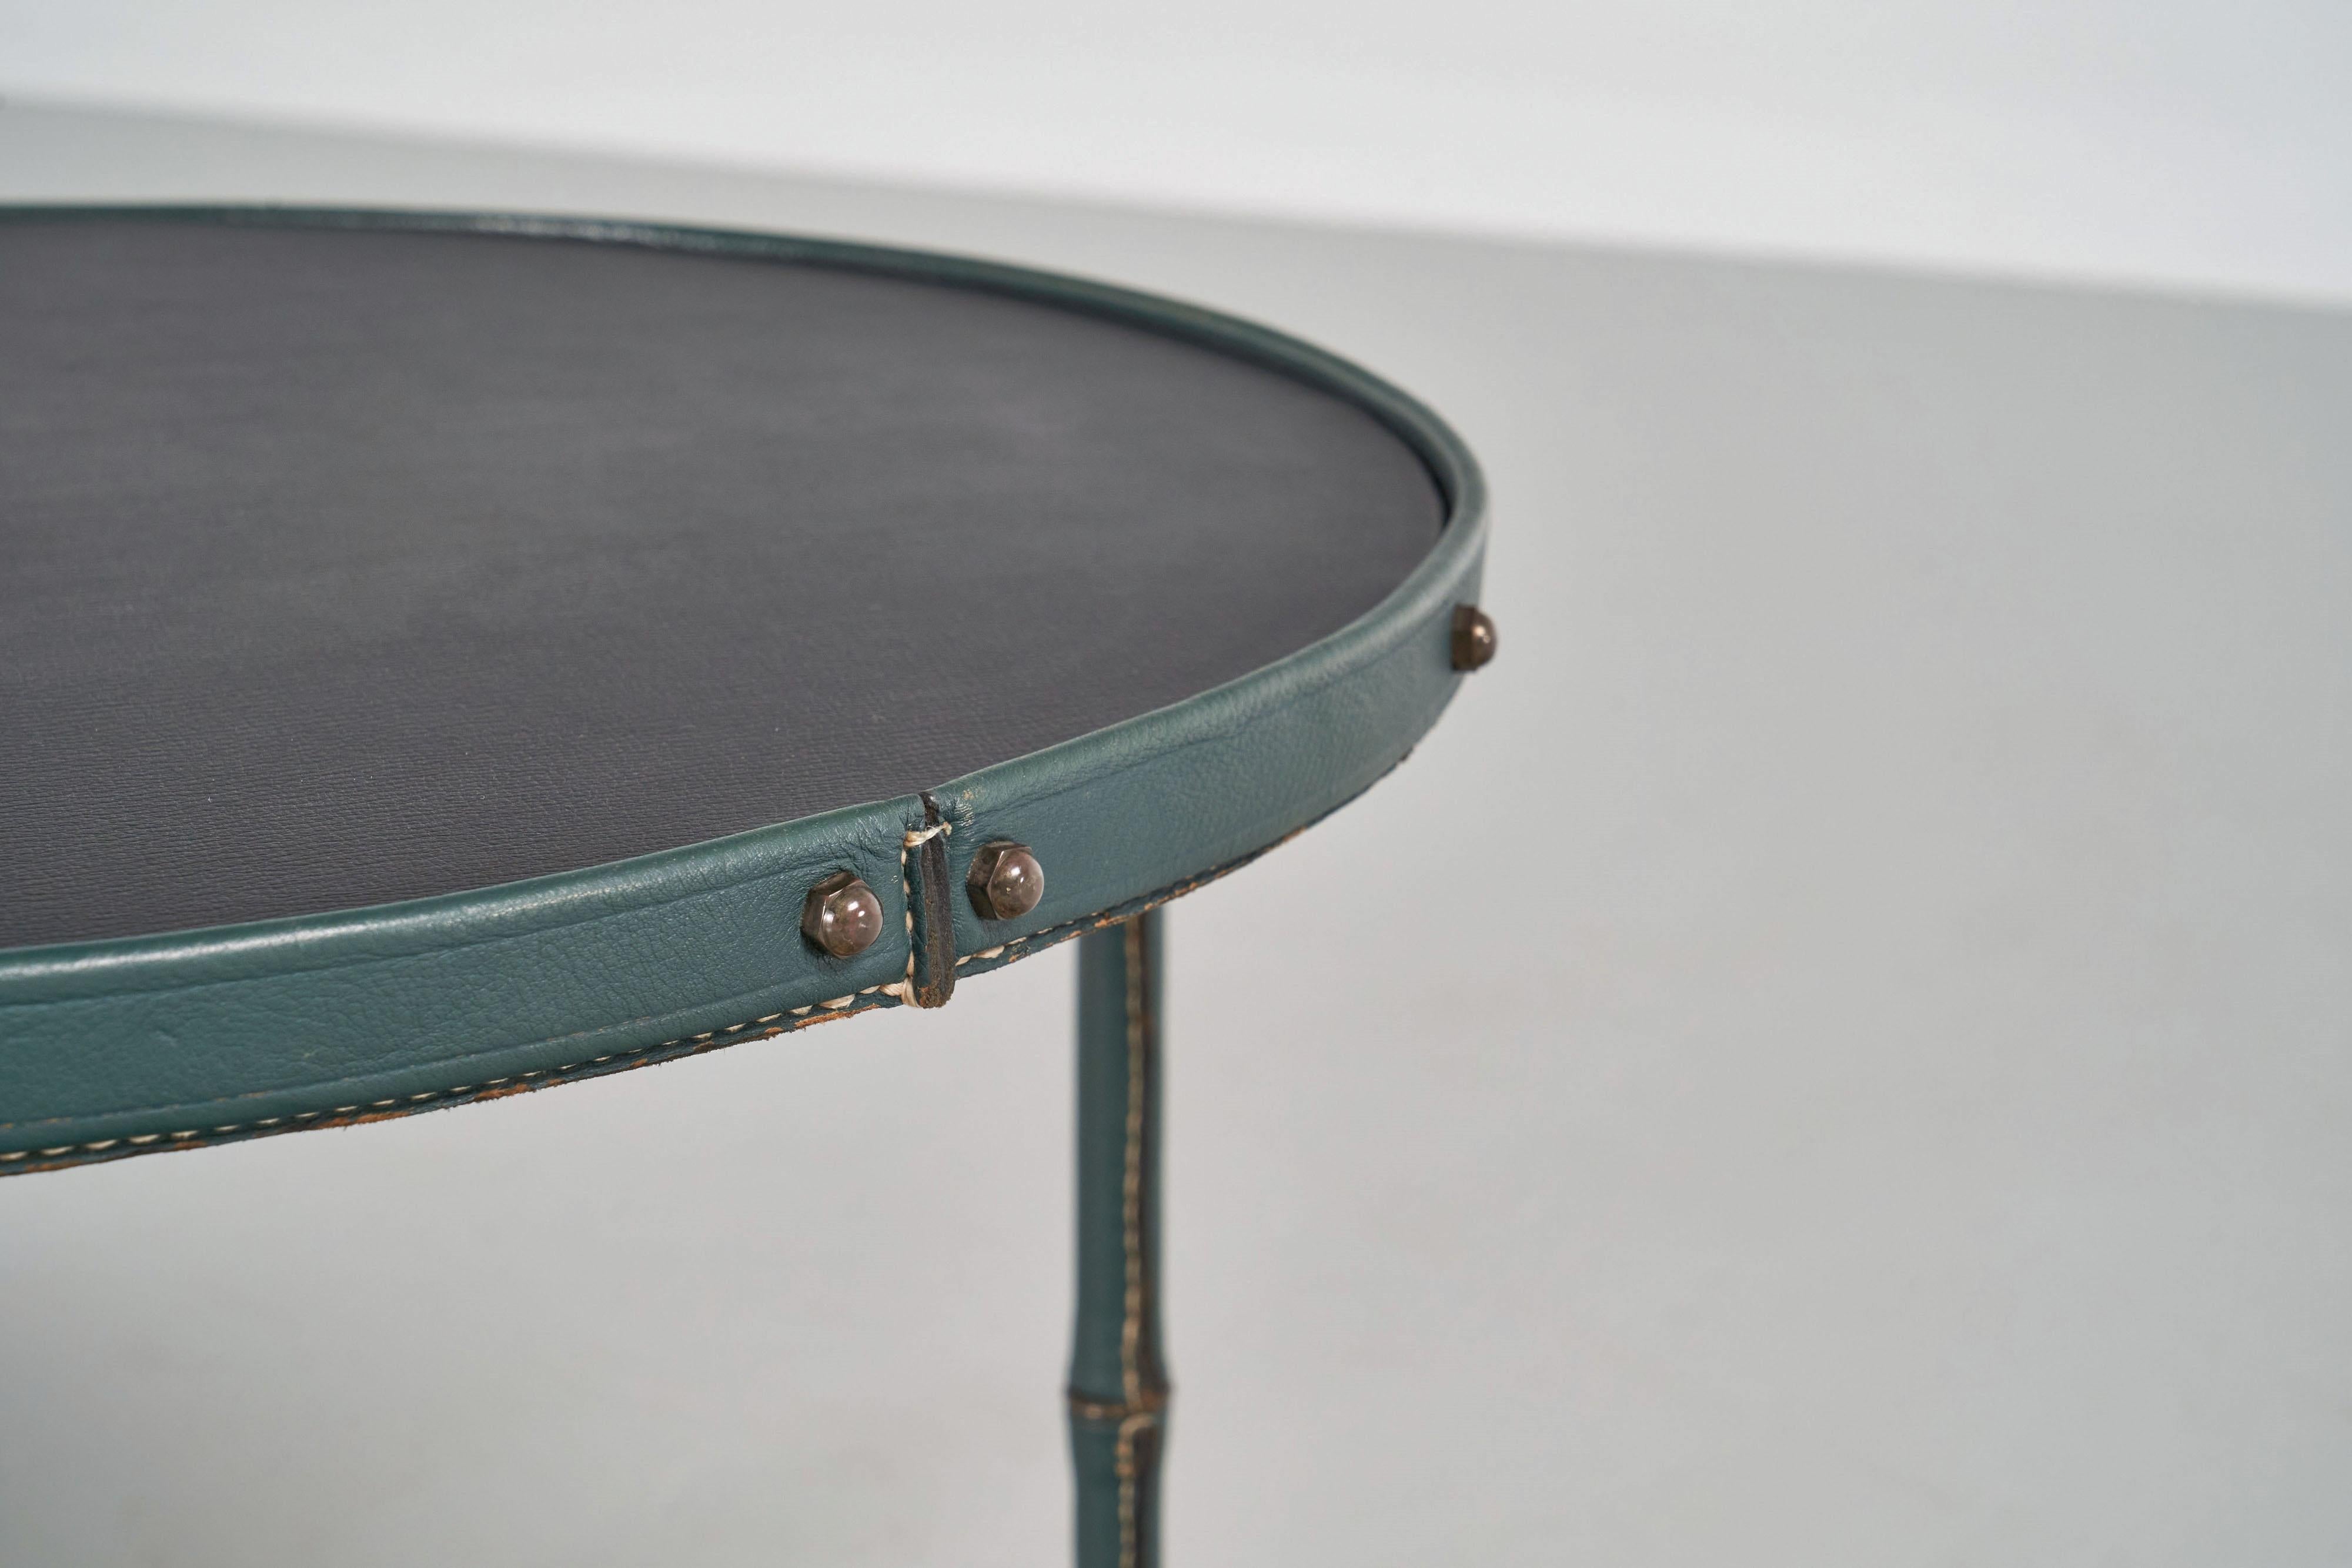 Highly refined full leather covered small coffee or side table designed by Jacques Adnet and manufactured by Ateliers Jacques Adnet, France 1950. This super nice shaped and super quality table has a brass structure frame, fully covered with dark